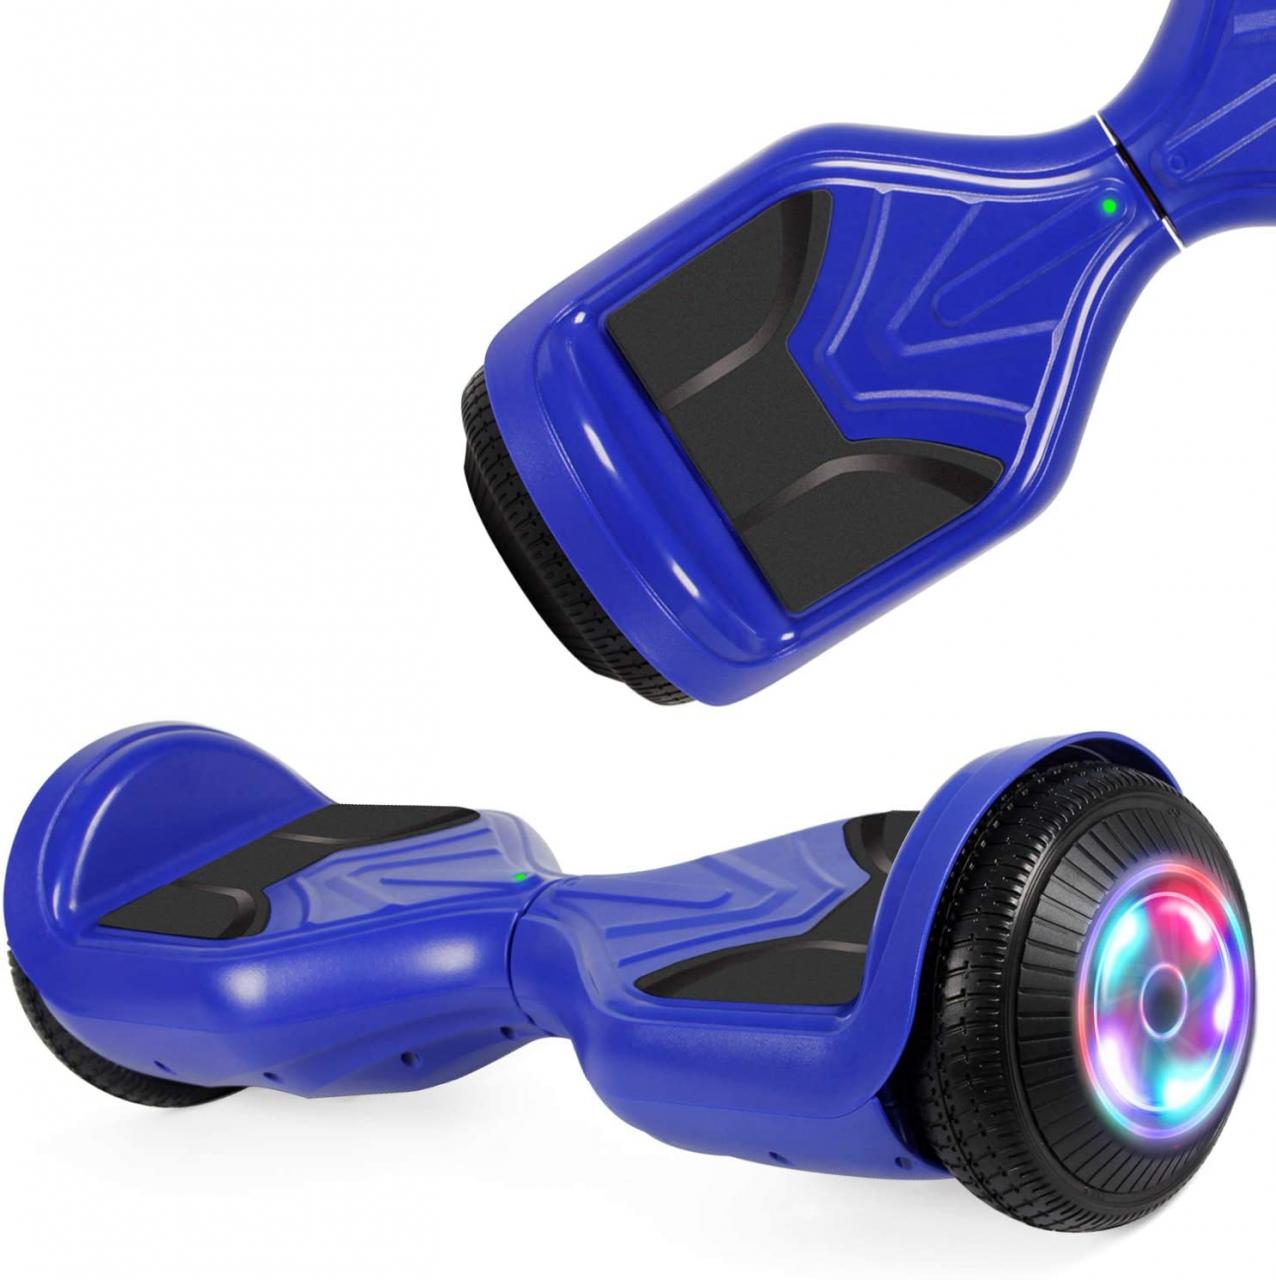 Buy UNI-SUN Hoverboard for Kids, 6.5 Two Wheel Hover Board, Hoverboard with  Bluetooth LED Lights for Adults and Kids Online in Hong Kong. B08G1KMQ6P